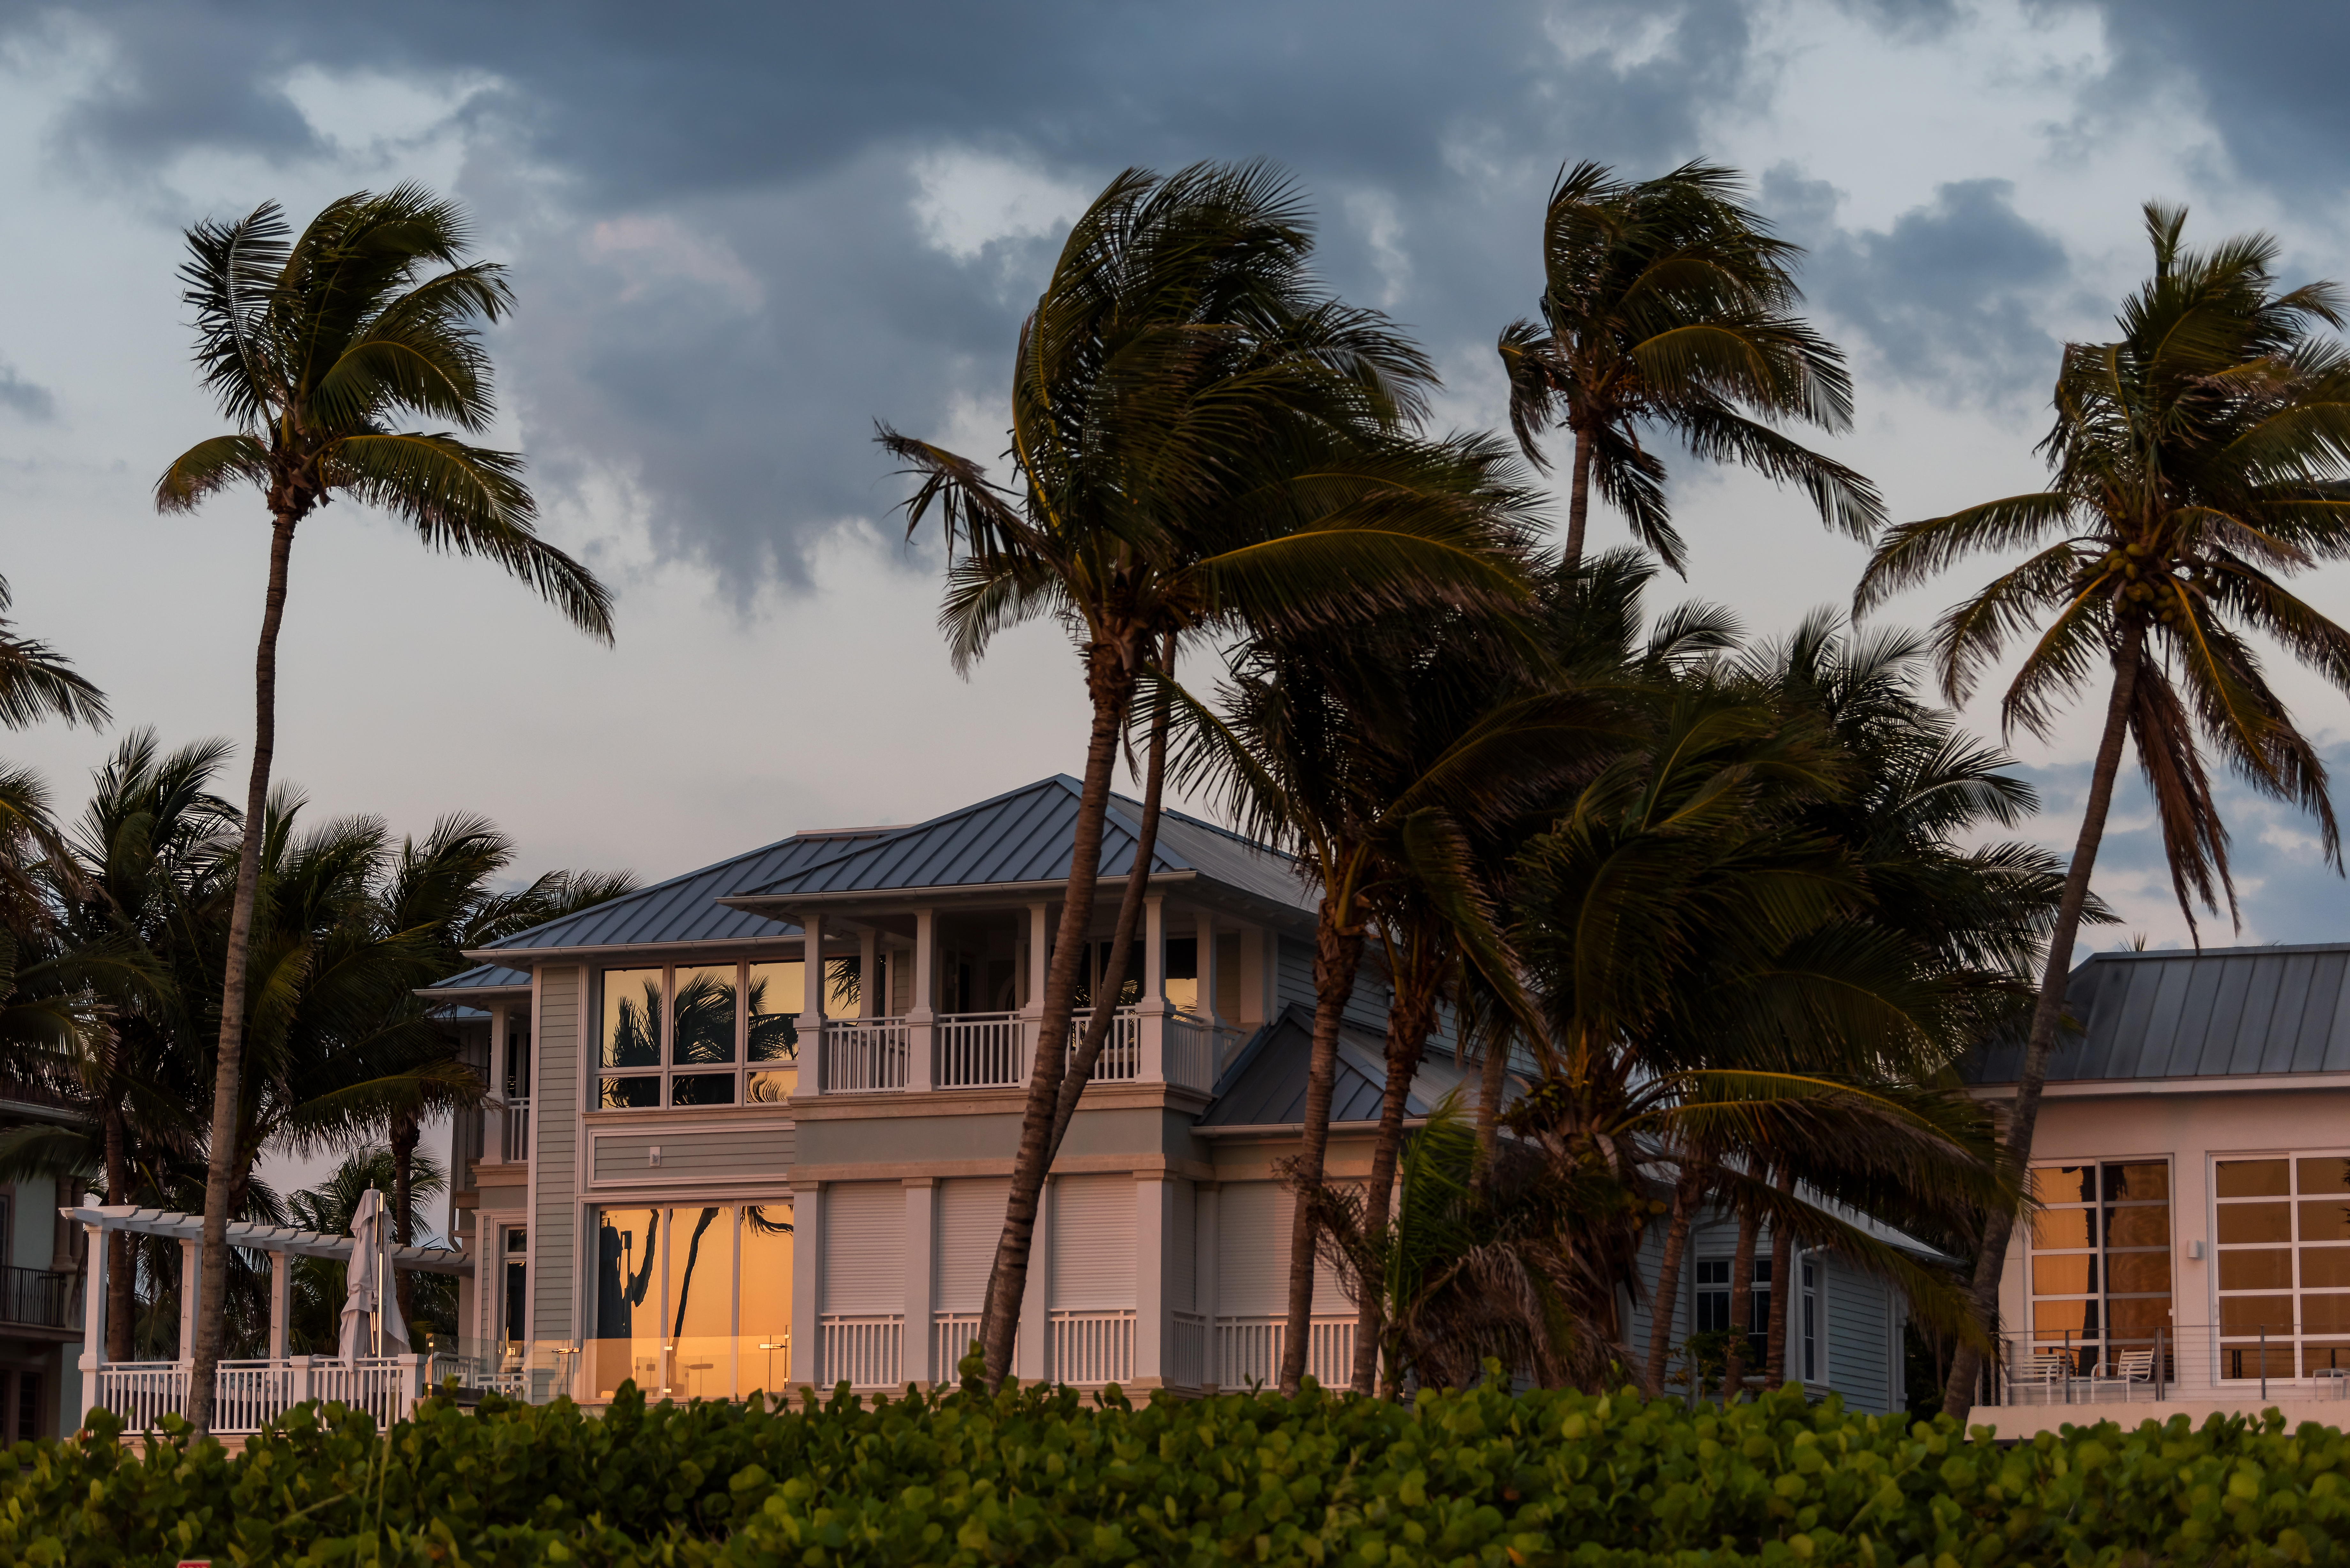 Coast house beachfront waterfront vacation home, house during evening sunset with nobody in Florida, gulf of mexico, storm weather and wind palm trees